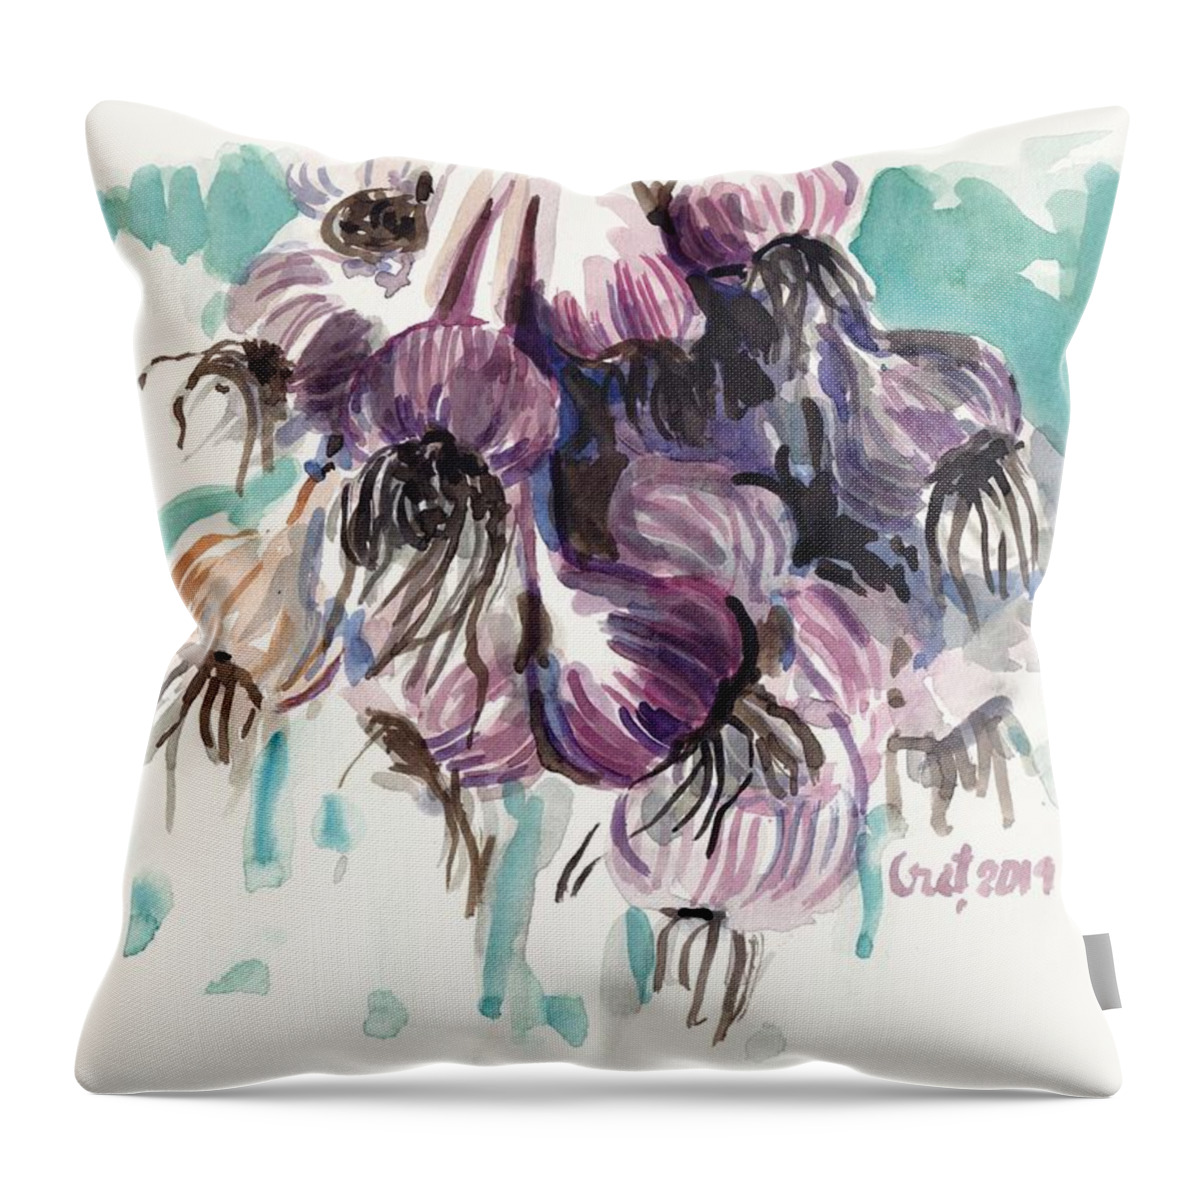 Garlic Throw Pillow featuring the painting Garlic Flowers by George Cret